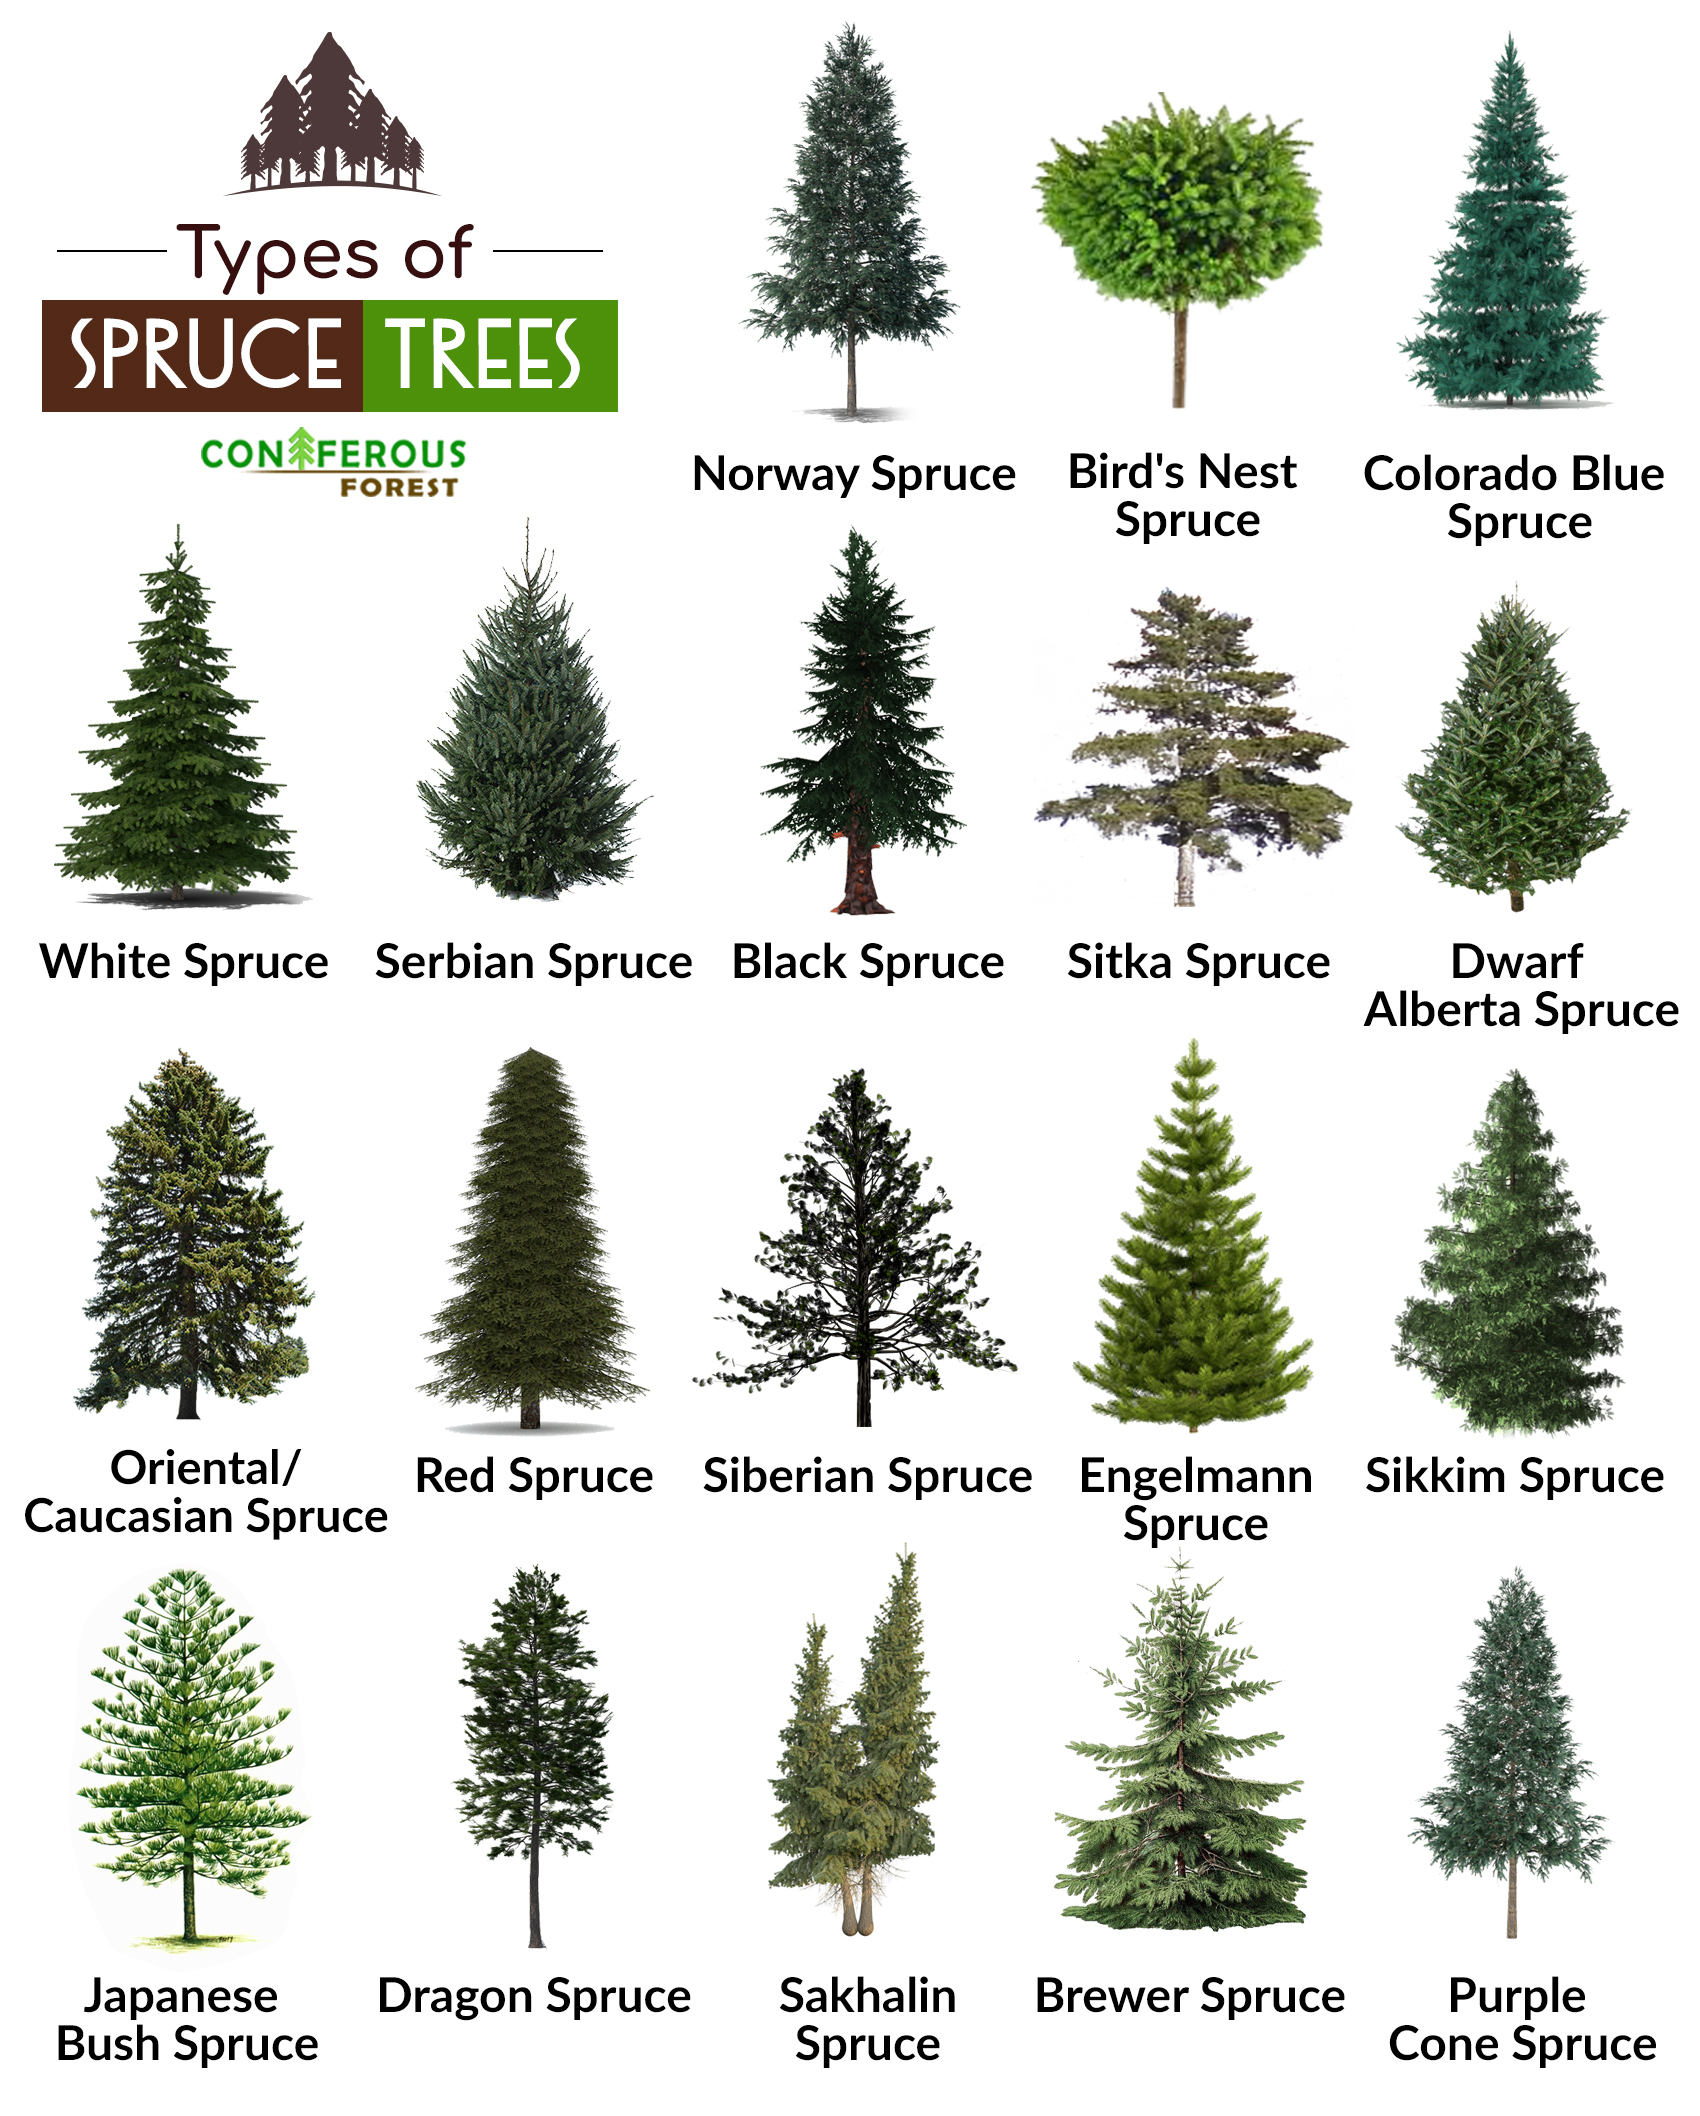 spruce tree facts, types, identification, diseases, pictures